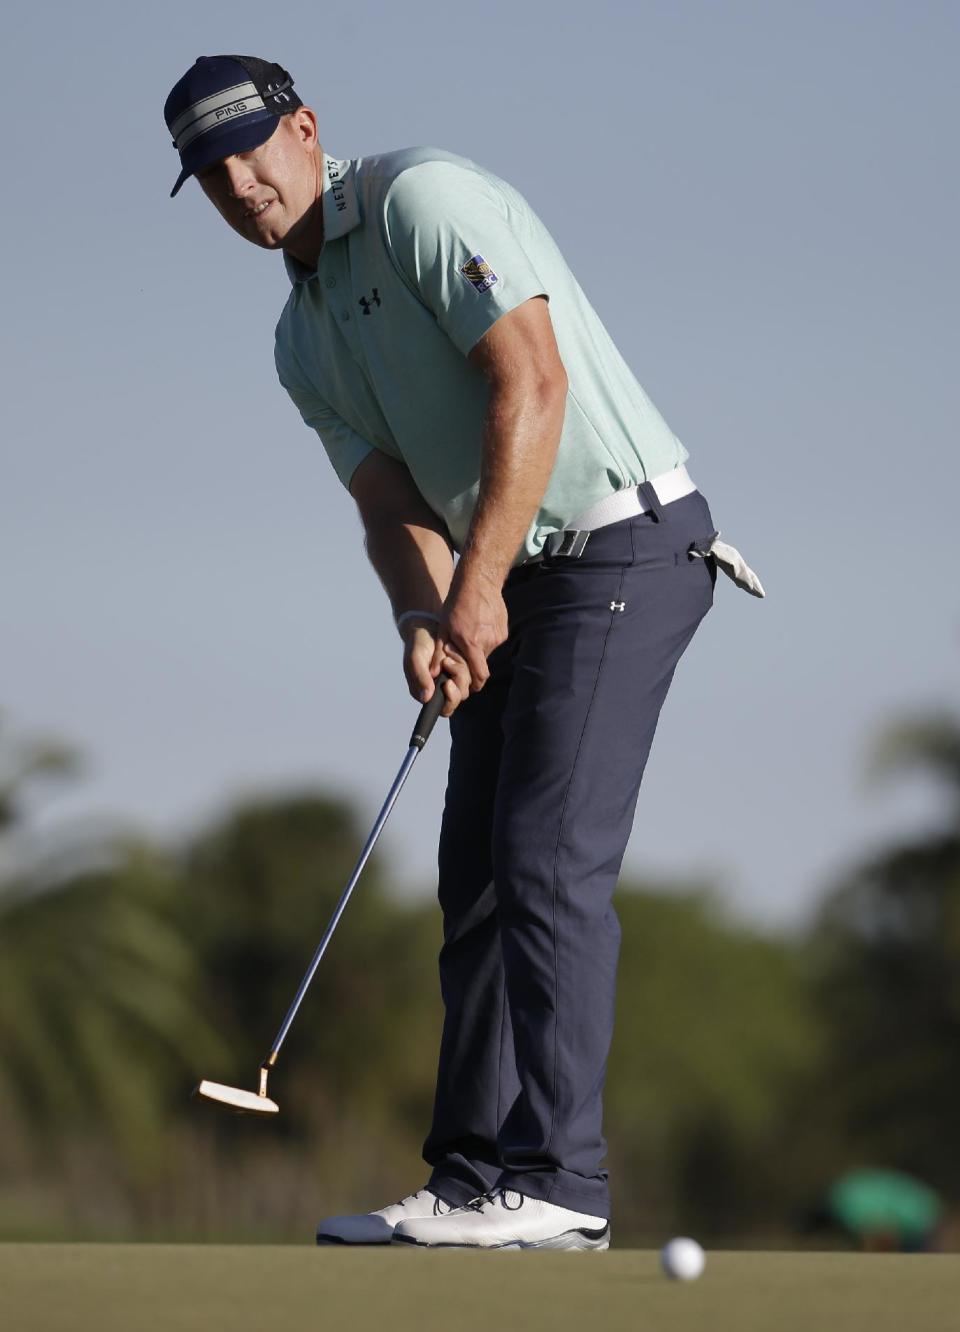 Hunter Mahan hits on the 14th green during the third round of the Cadillac Championship golf tournament Saturday, March 8, 2014, in Doral, Fla. (AP Photo/Lynne Sladky)